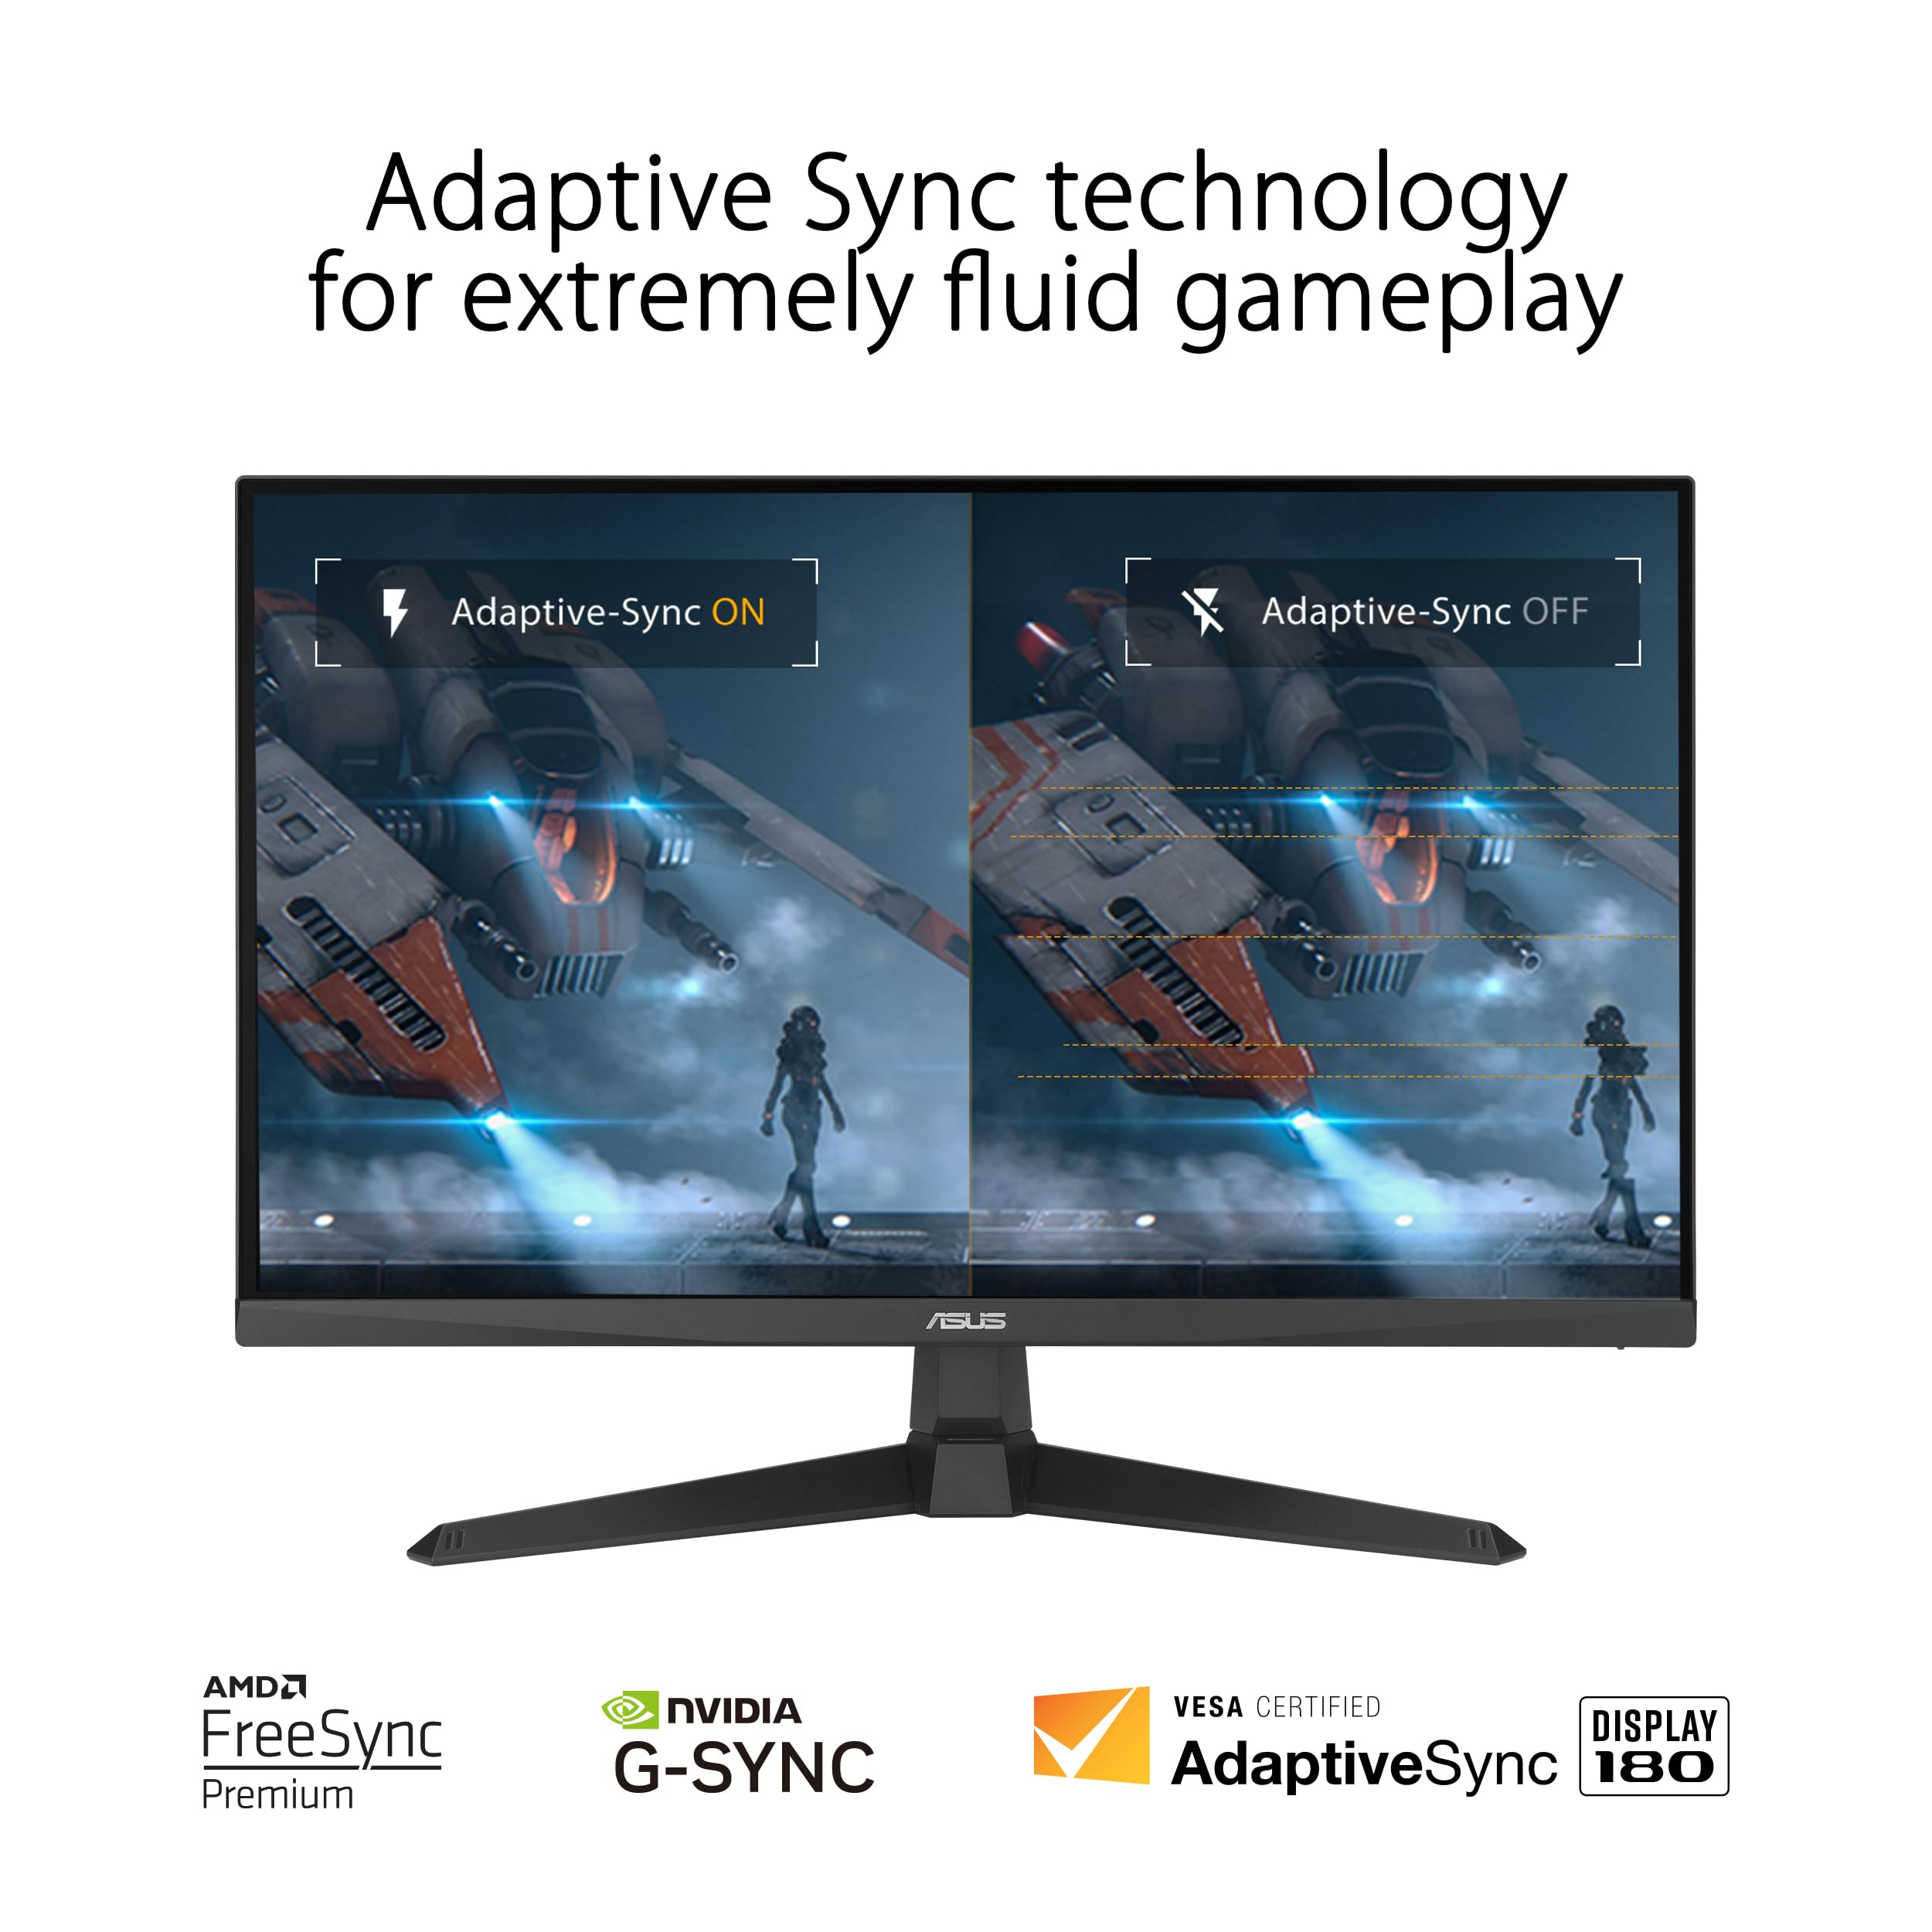 ASUS TUF Gaming 27” 1080P Monitor (VG279Q3A) – Full HD, 180Hz, 1ms, Fast IPS, Extreme Low Motion Blur Sync, FreeSync Premium, G-SYNC Compatible, Variable Overdrive, 99% sRGB, DisplayPort, HDMI